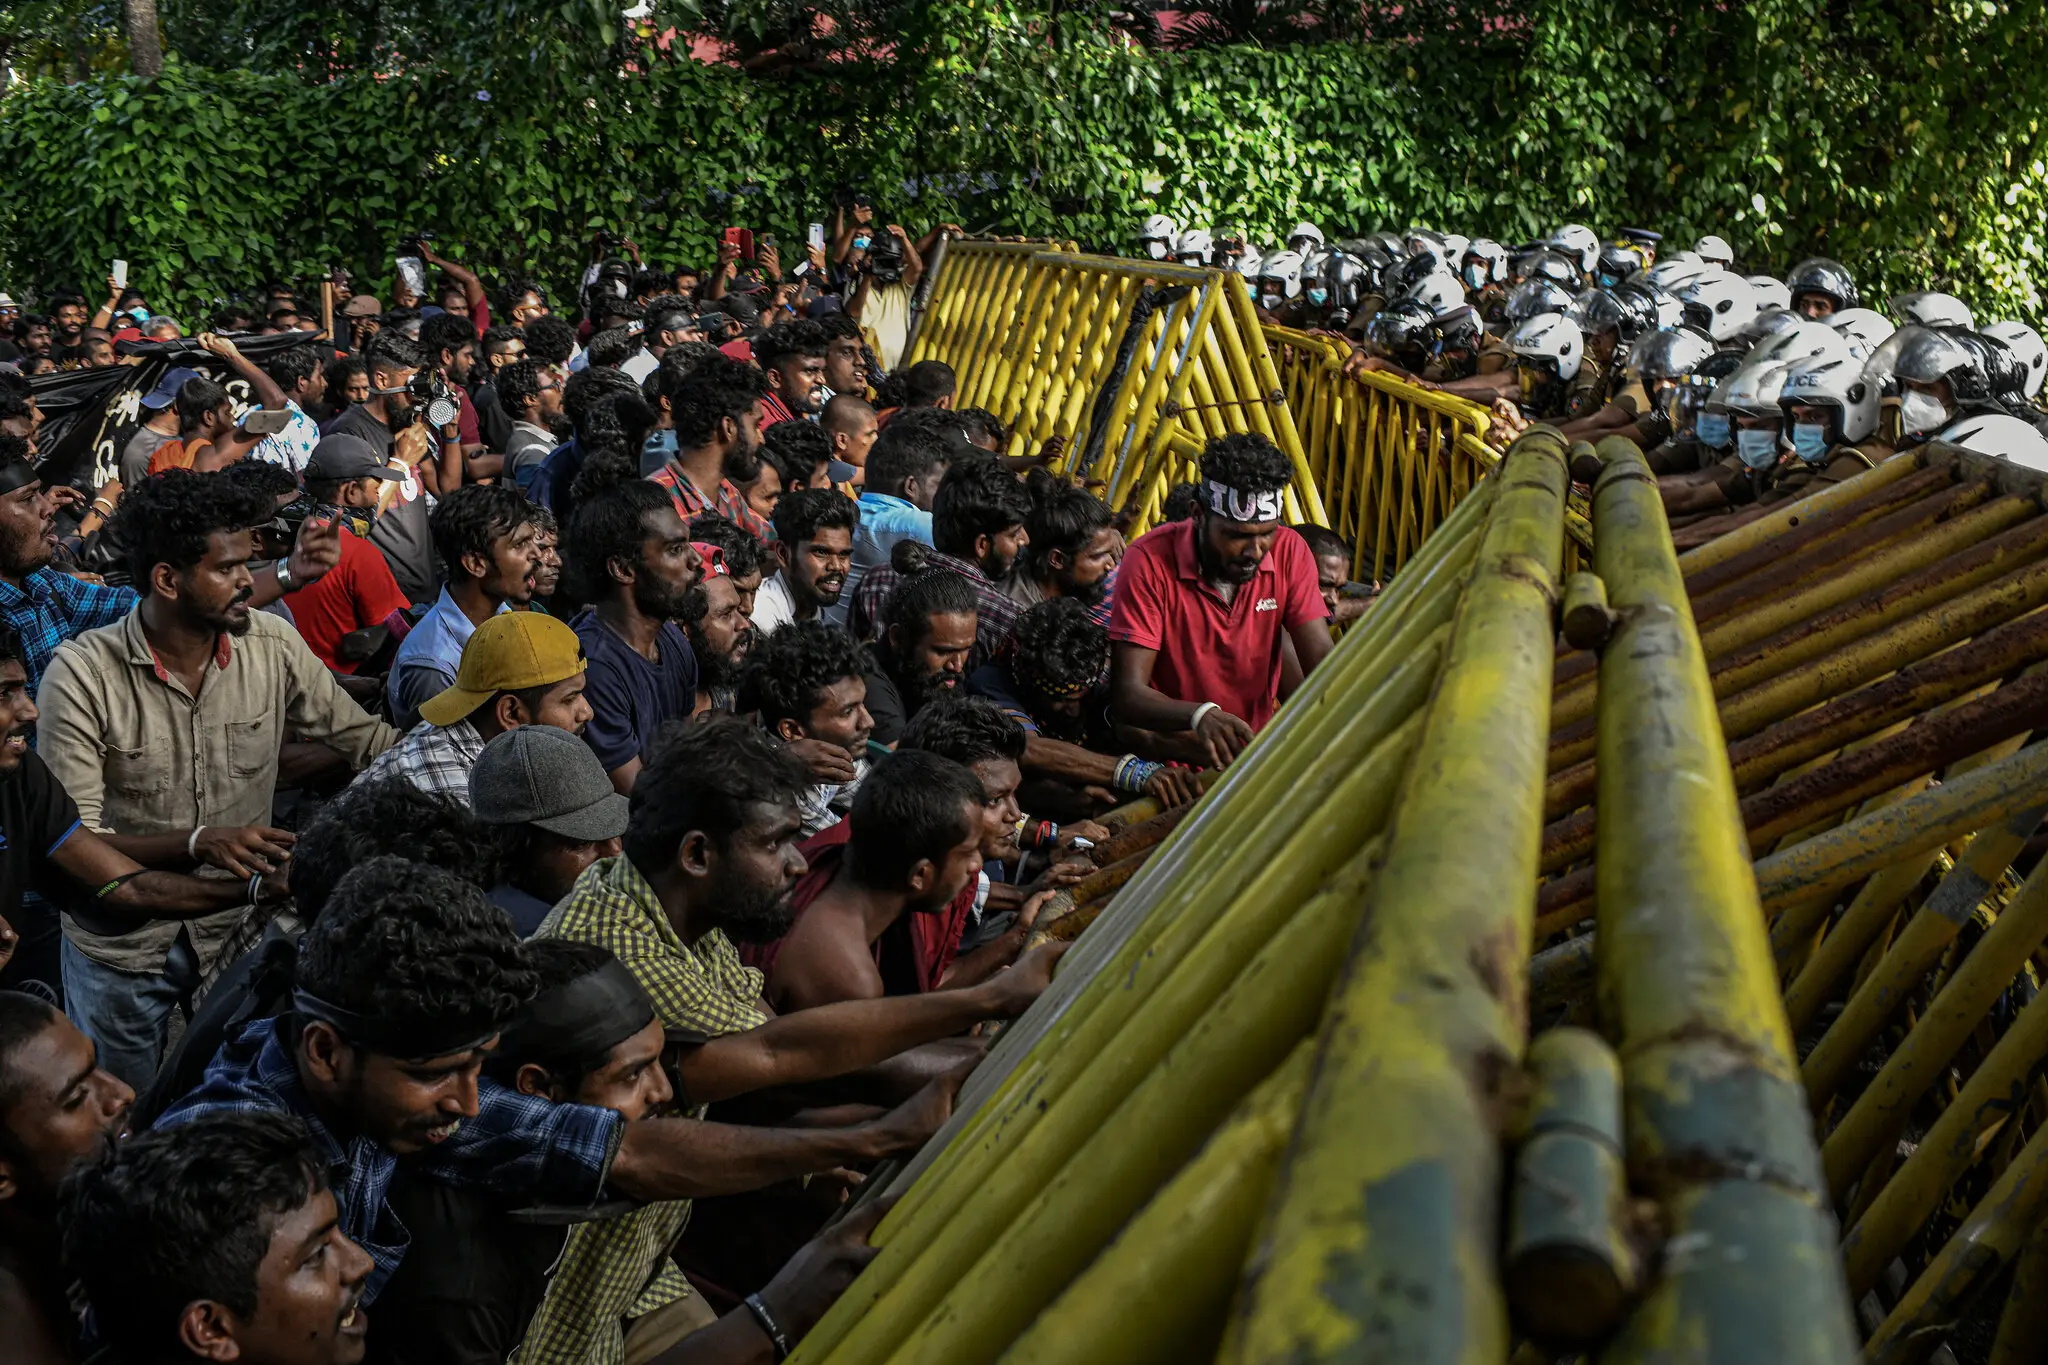 Protesters in Sri Lanka confront police across a barricade, 19 May 2022. With no end in sight to the national economic crisis that led them to take to the streets, protesters in Sri Lanka are digging in against a president they blame for crashing the economy. On 19 May 2022, as hundreds of student protesters continued their call for the resignation of President Gotabaya Rajapaksa, they were met with police tear gas and water cannons. They endured this, and a monsoon downpour that followed, adding loudspeakers to amplify their chants and speeches expressing anger at the government. Photo: Atul Loke / The New York Times